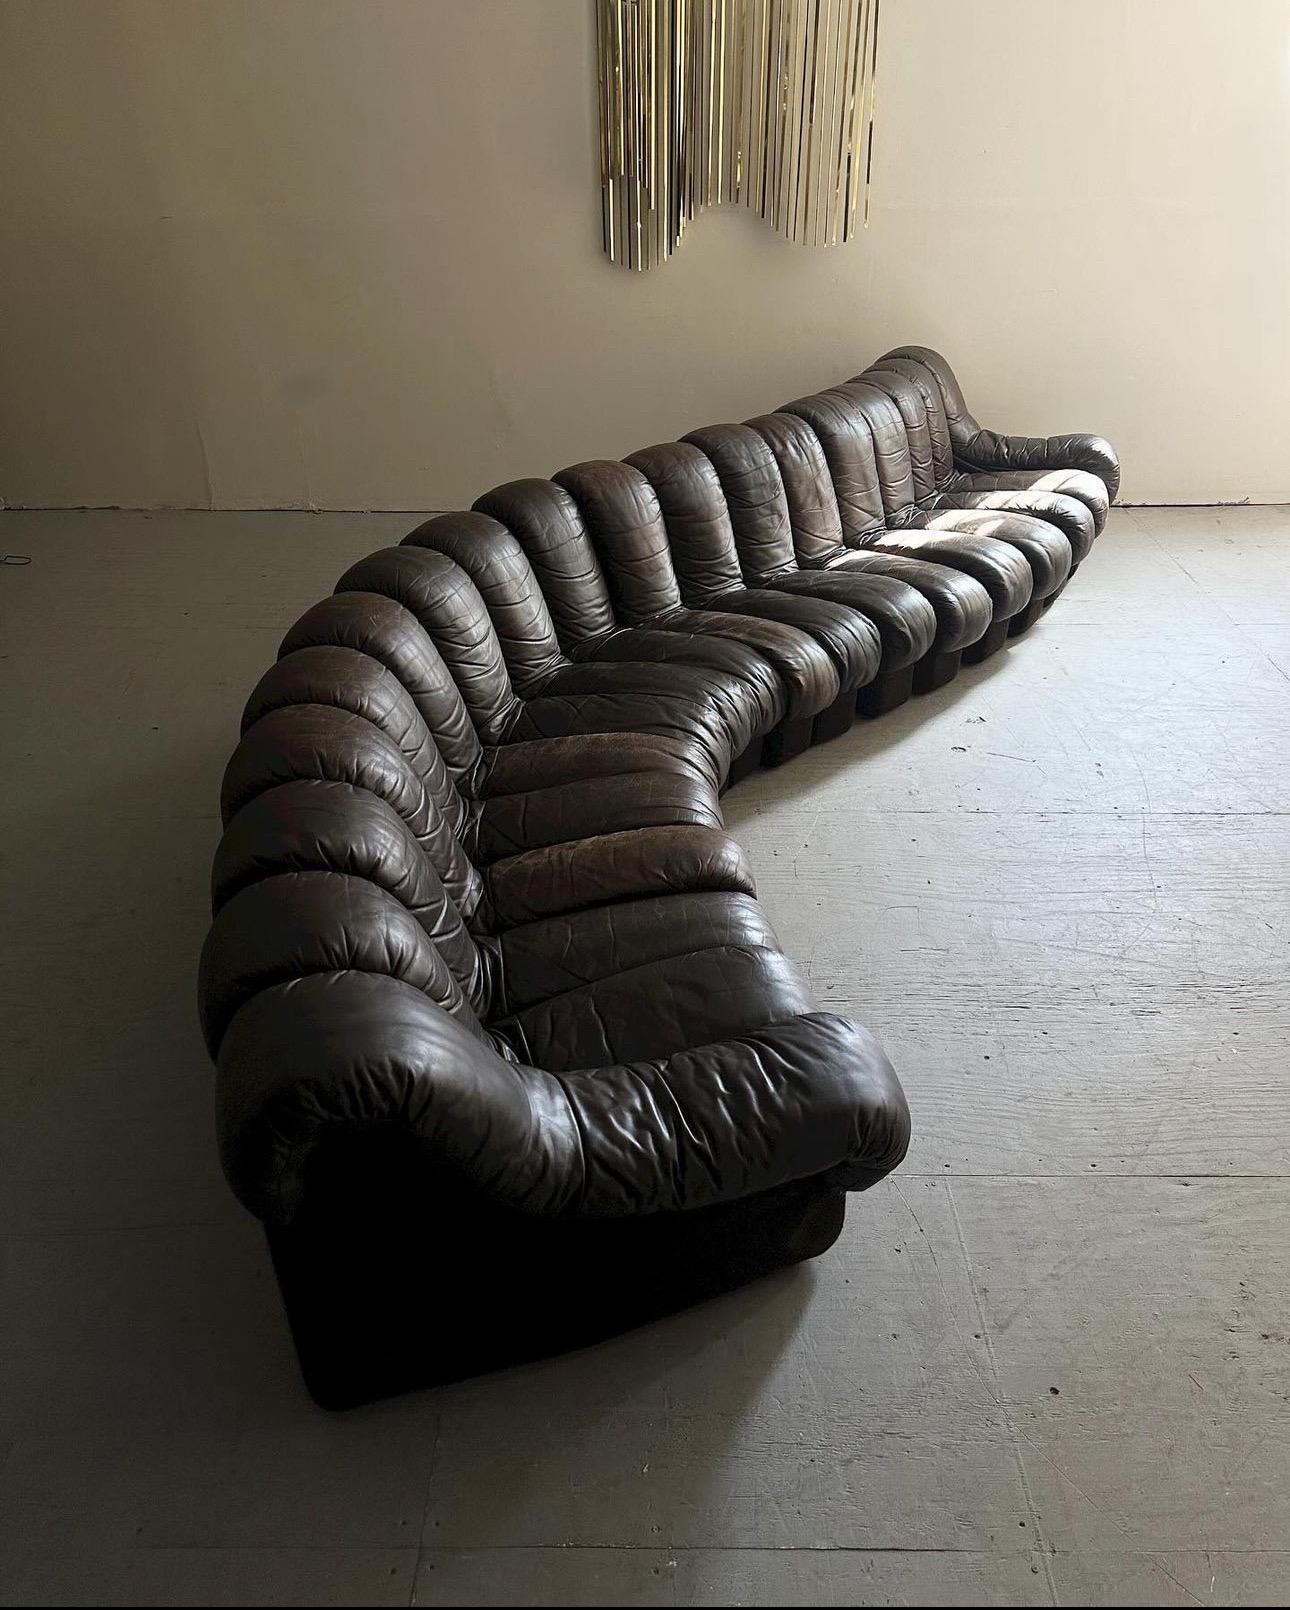 A monumental Mid-Century classic designed in collaboration by Ueli Bergere, Elenora Peduzzi-Riva, Heinz Ulrich and Klaus Vogt at De Sede, Switzerland. Comes wrapped in original dark brown leather upholstery. This modular sectional sofa with endless